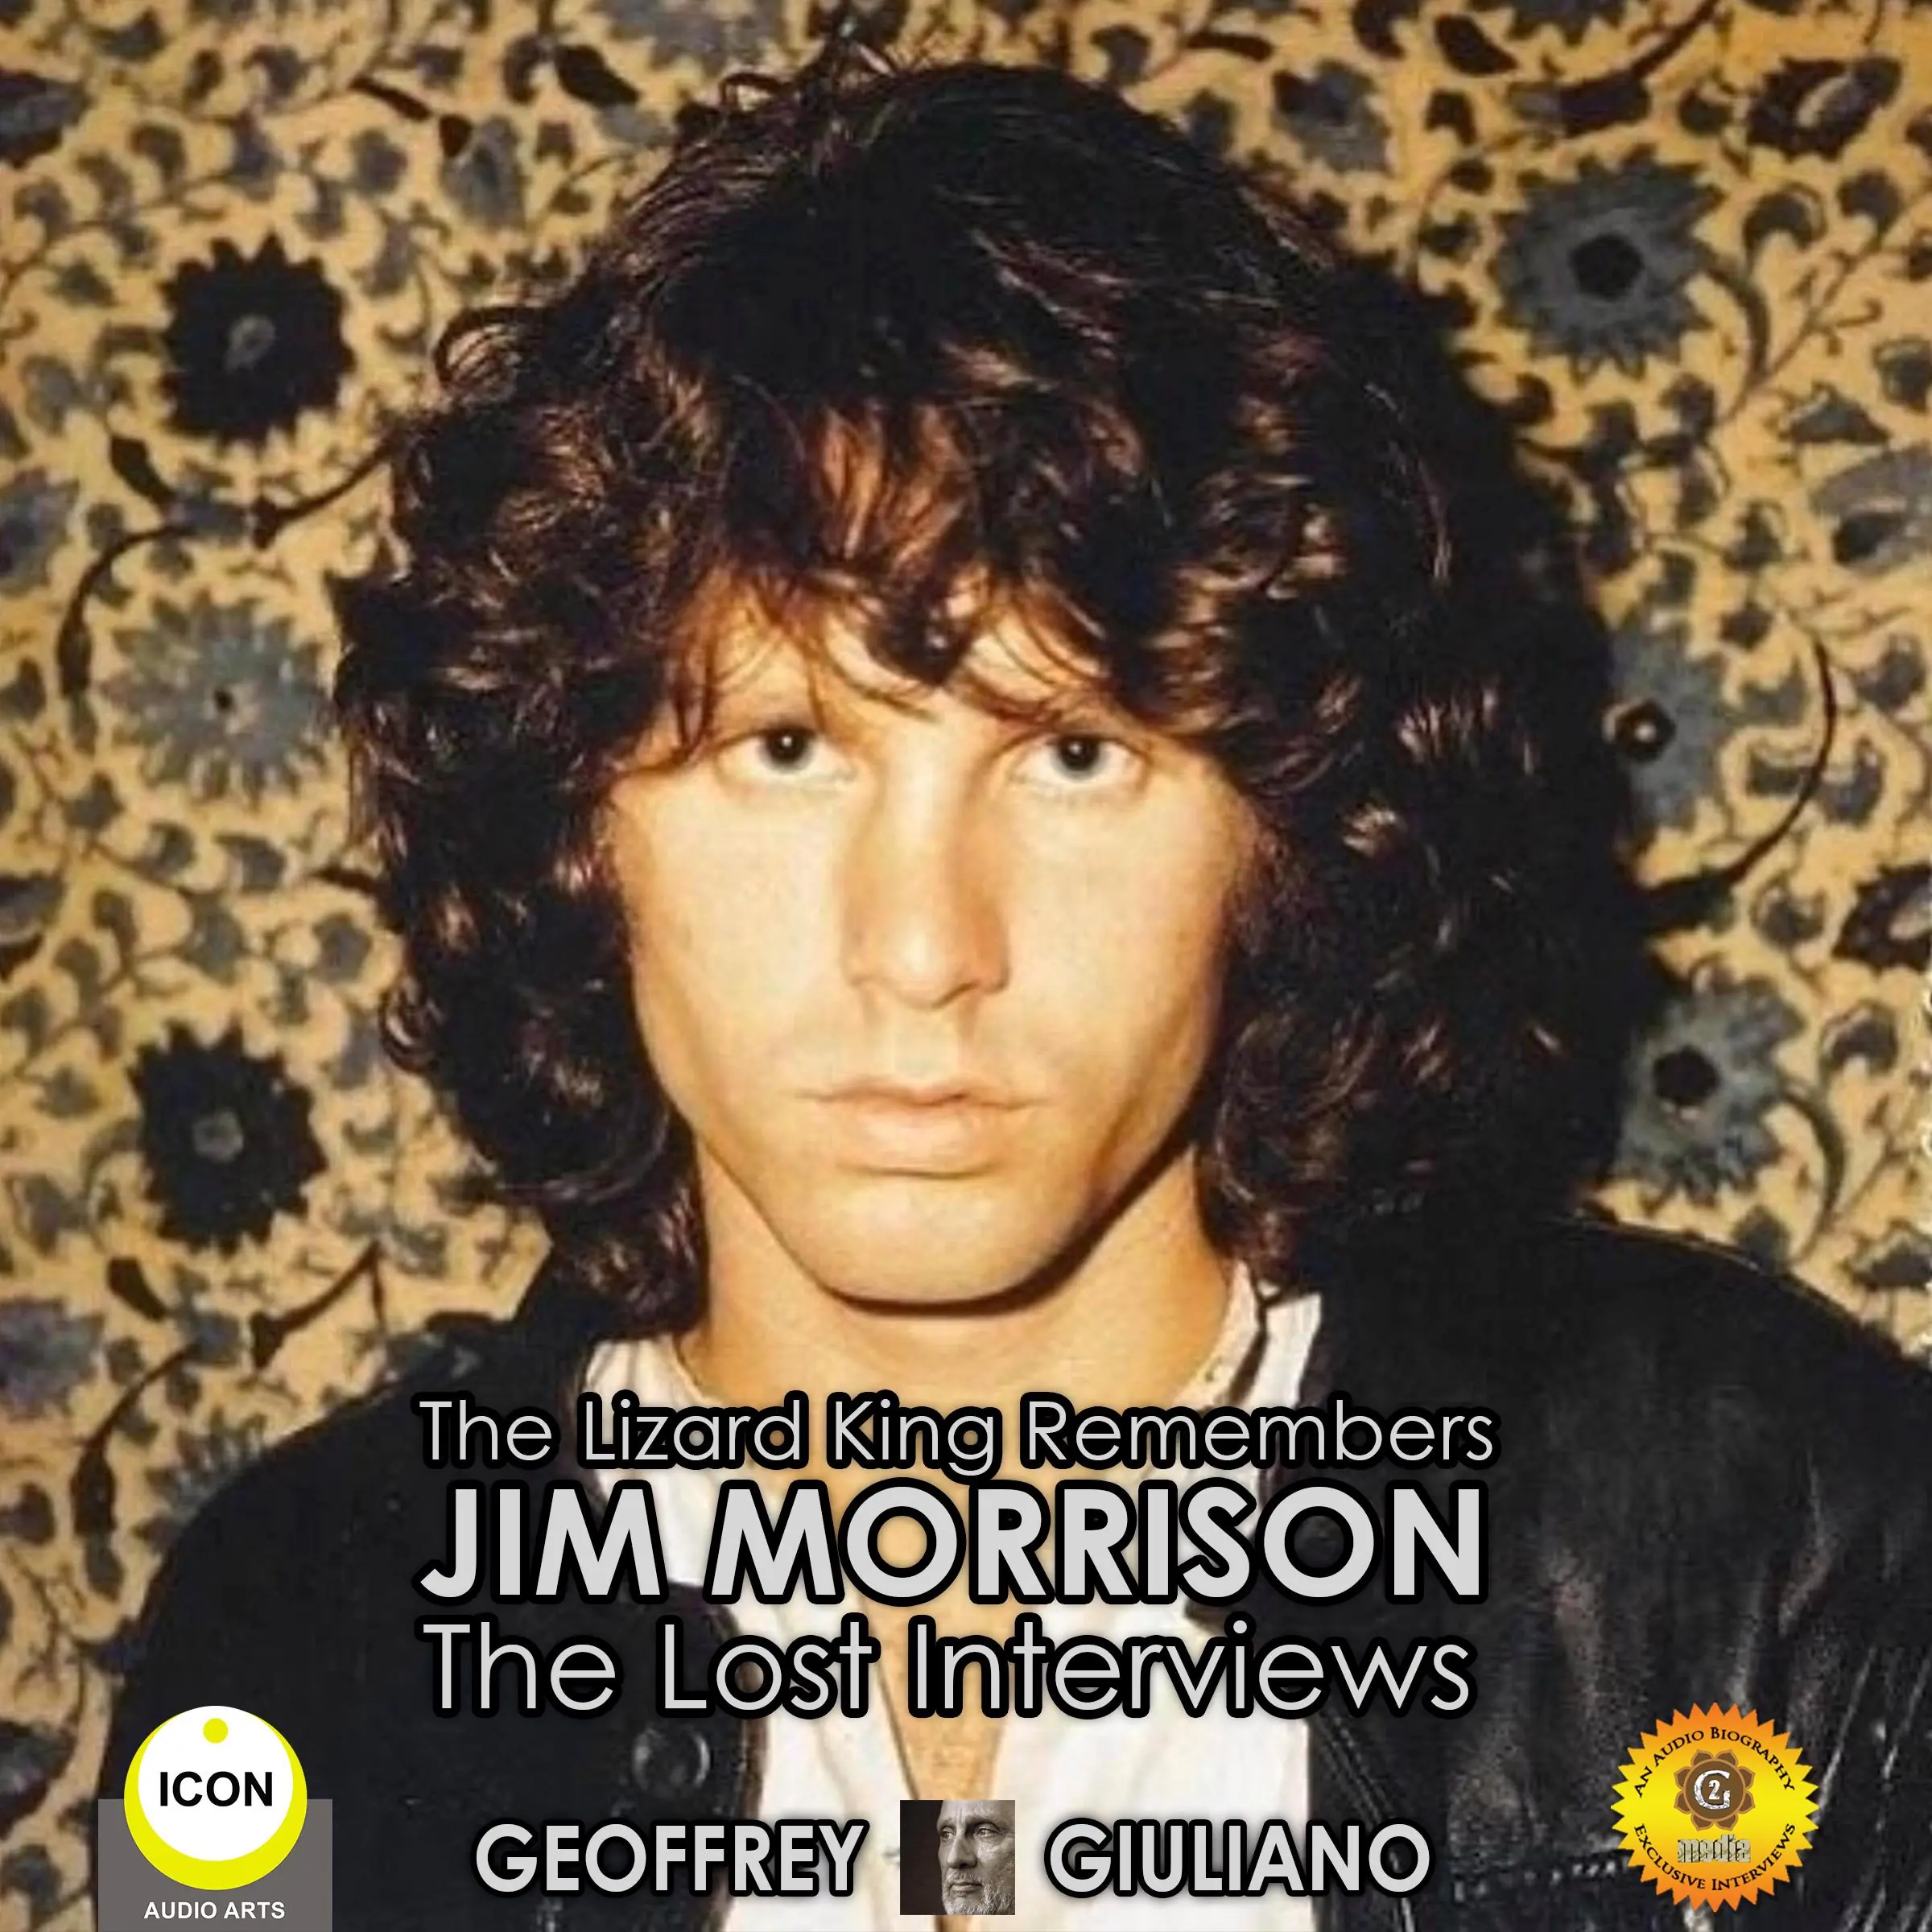 The Lizard King Remembers Jim Morrison - The Lost Interviews by Geoffrey Giuliano Audiobook